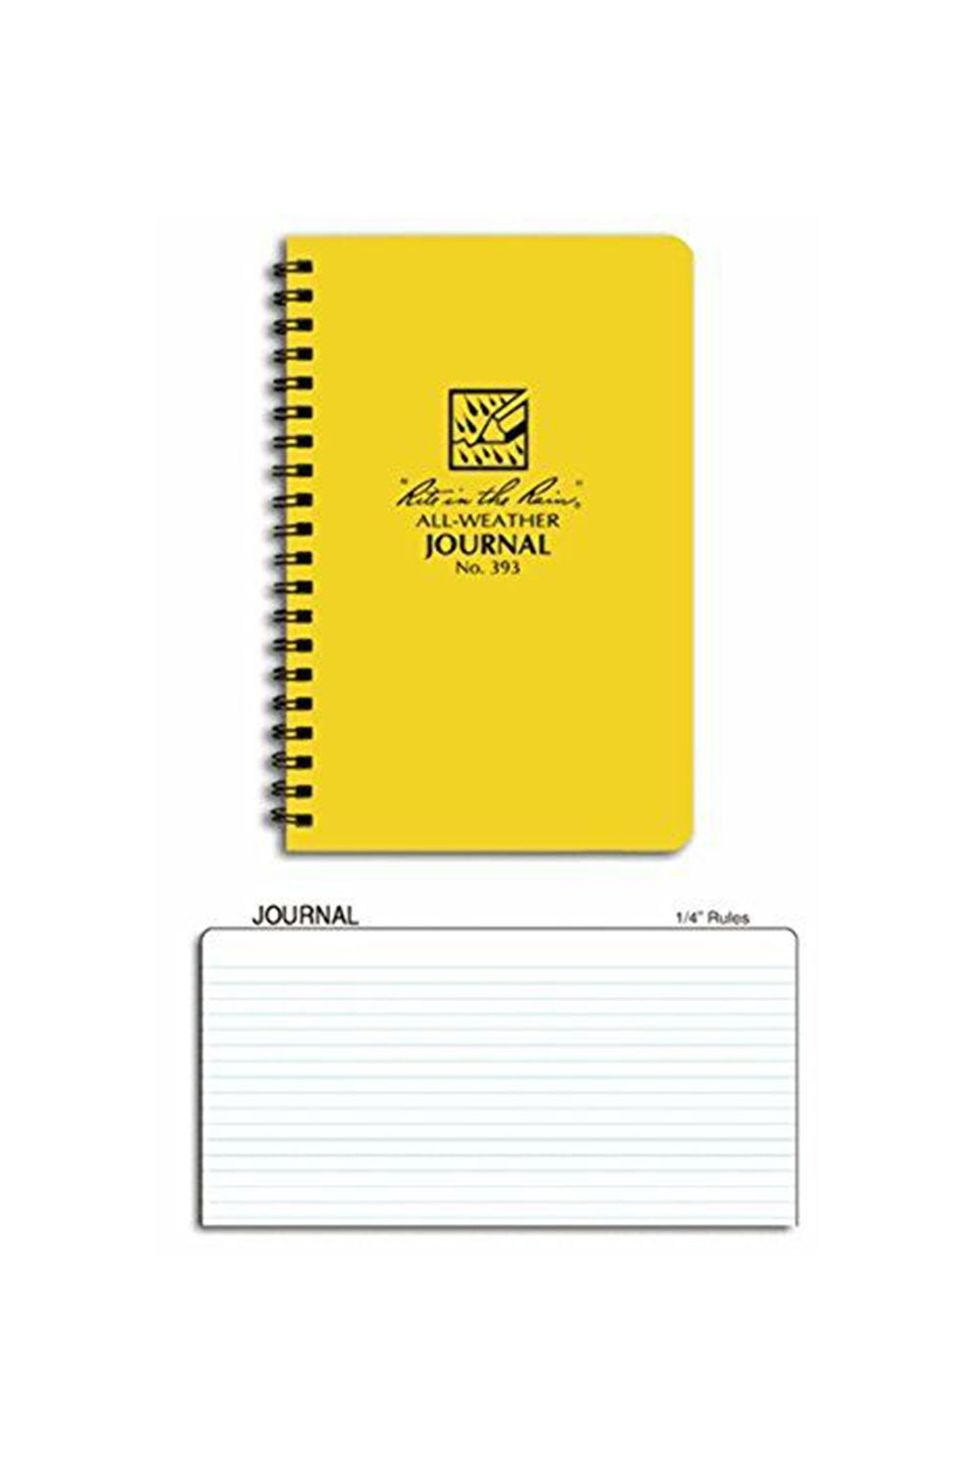 23 Best Journals for Writing 2022 - Unique Notebooks for Writers